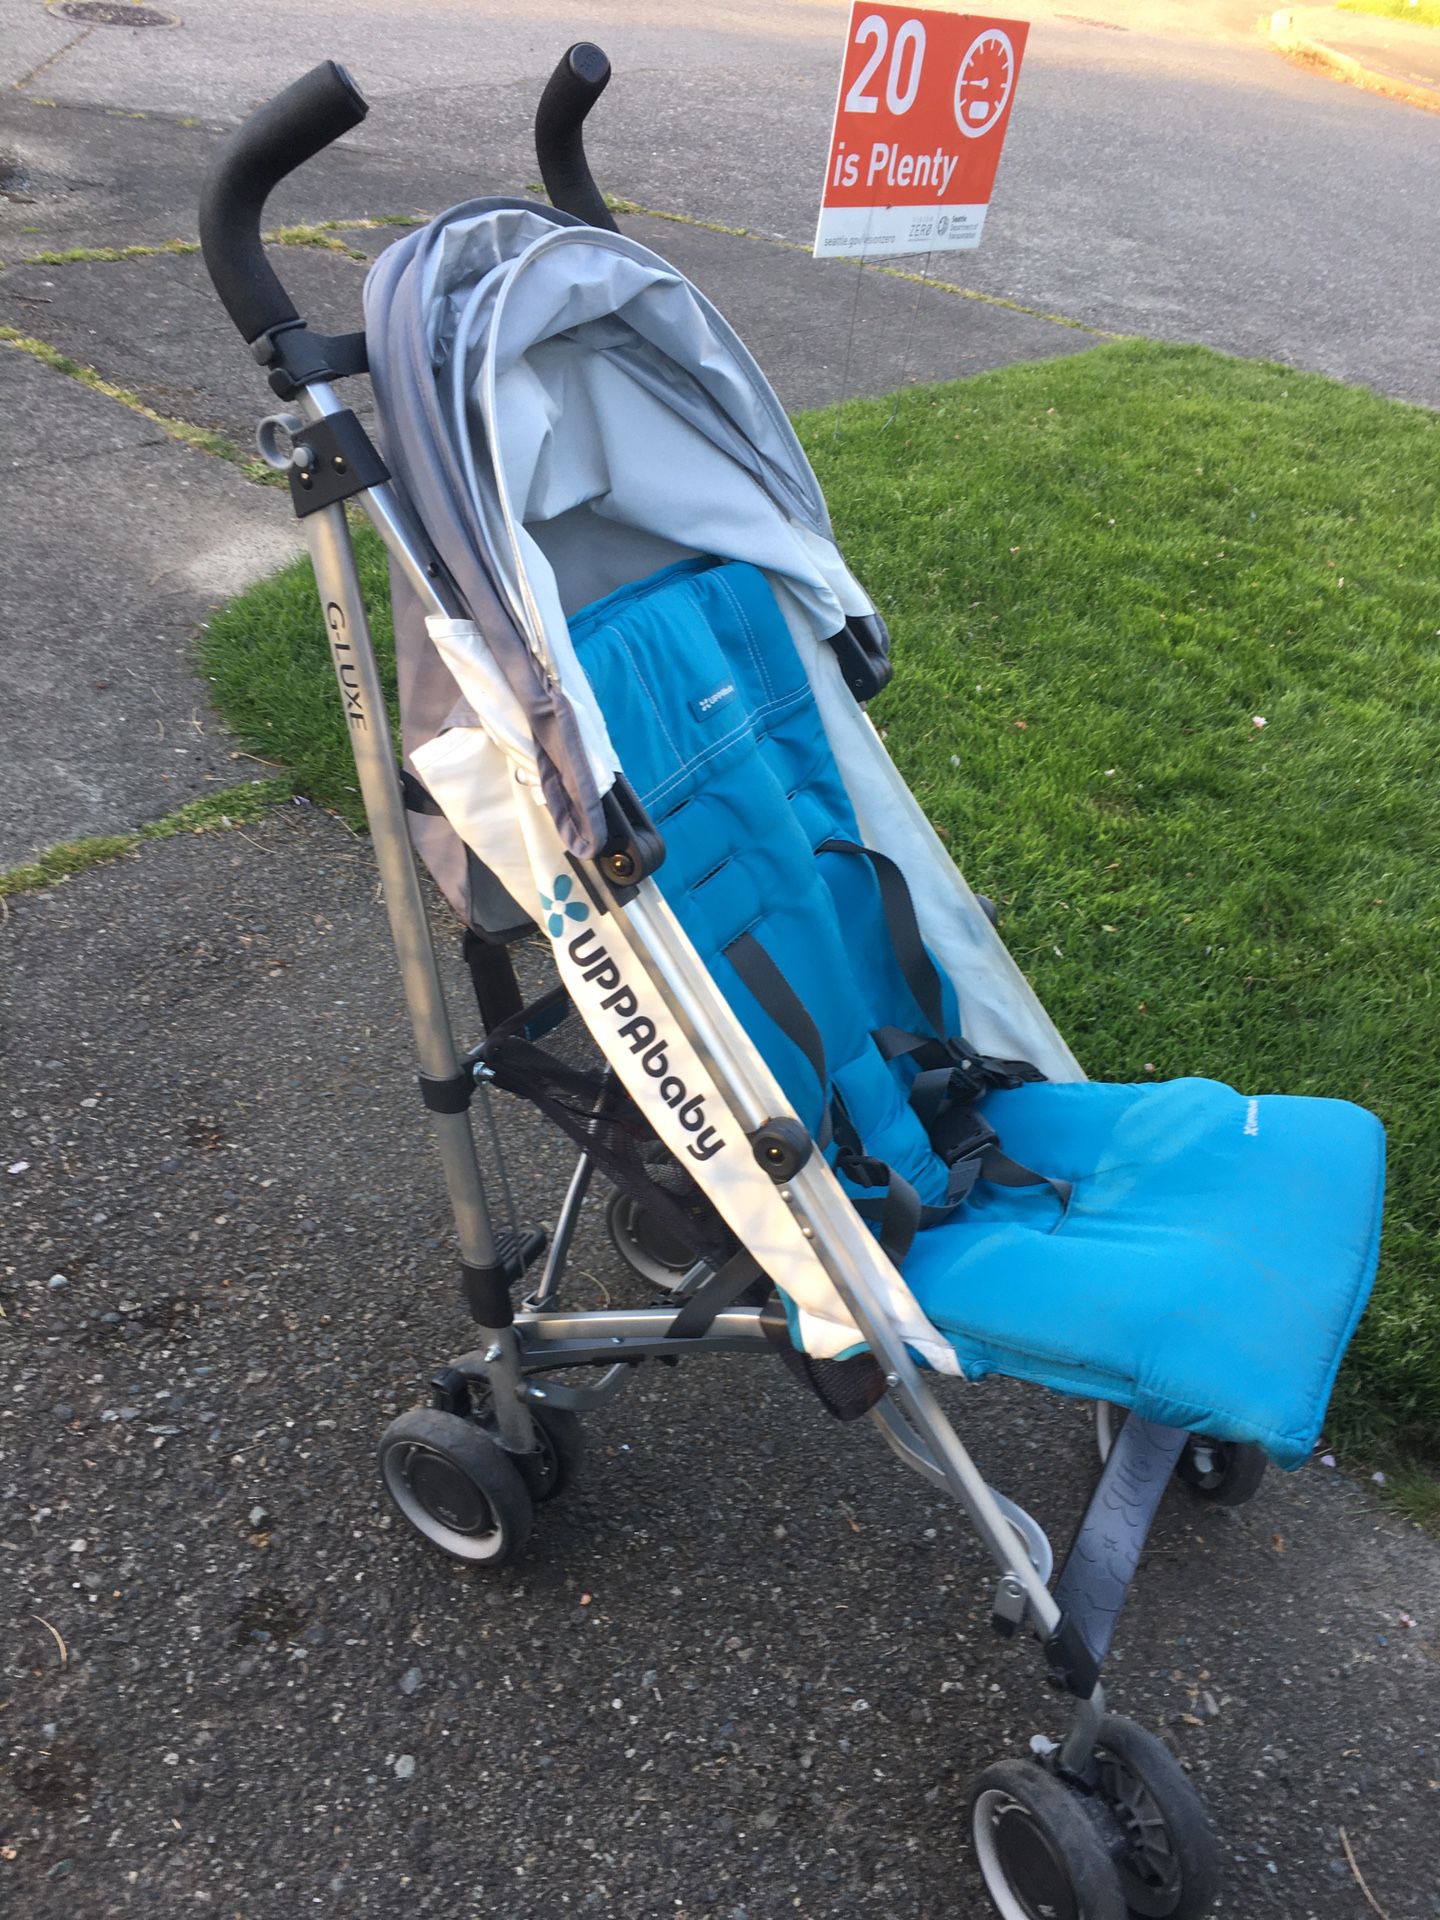 UPPABaby G-Luxe Stroller